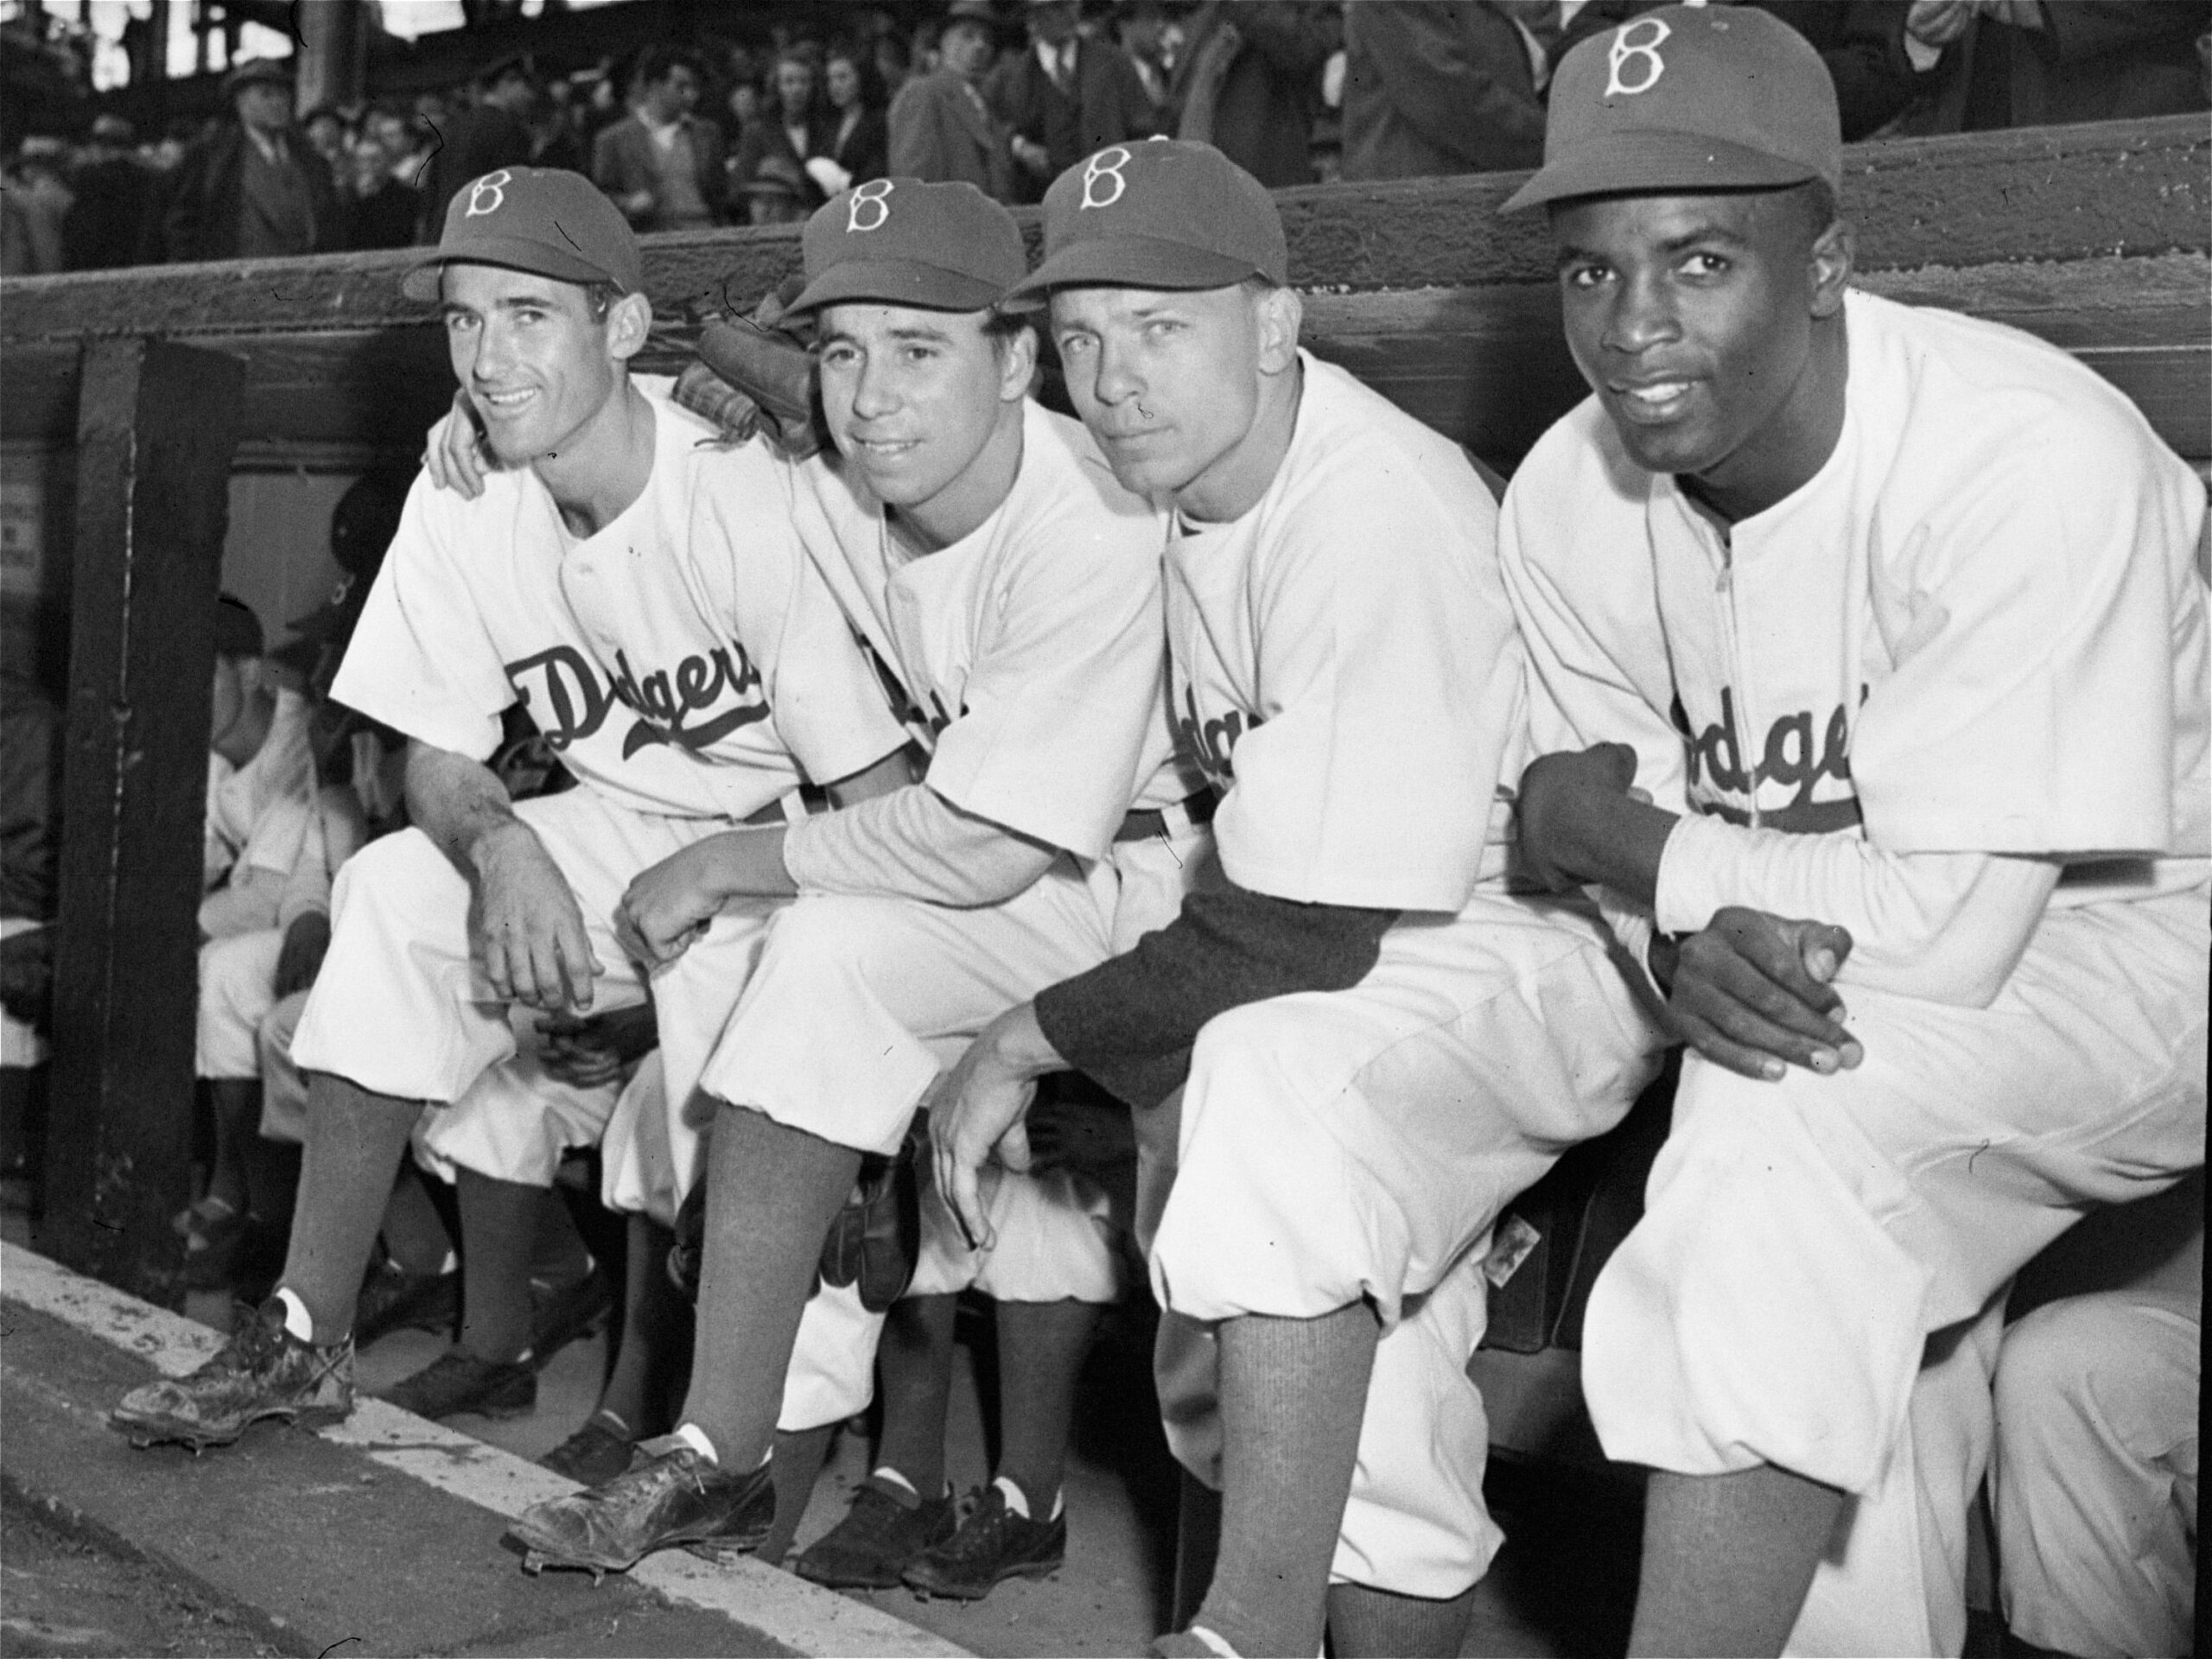 In this April 15, 1947, file photo, Brooklyn Dodgers baseball players, from left, third baseman John Jorgensen, shortstop Pee Wee Reese, second baseman Ed Stanky, and first baseman Jackie Robinson pose before the opener at Ebbets Field.